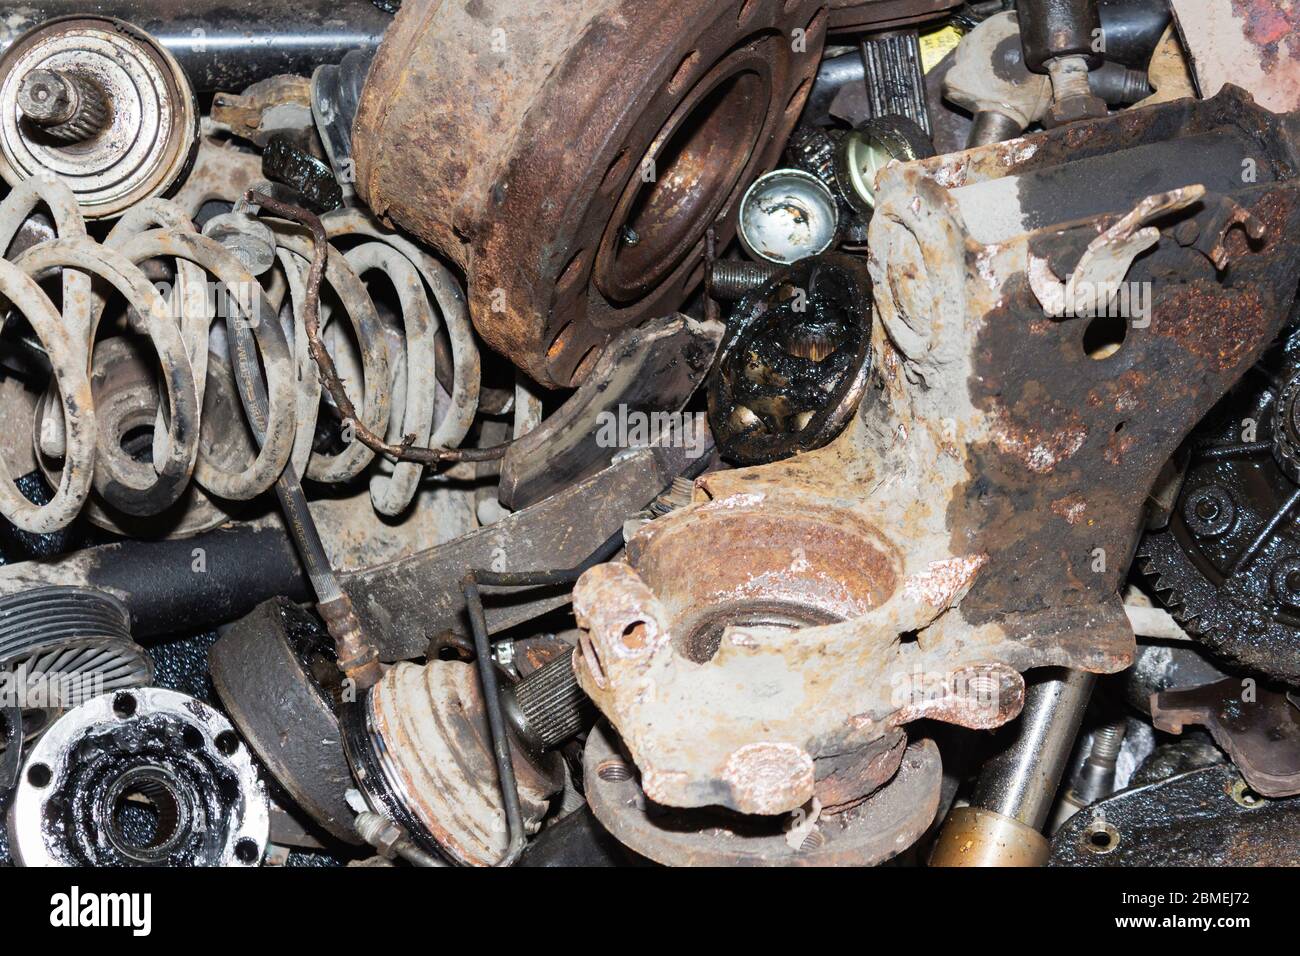 Useless, worn out rusty auto parts and other parts Stock Photo